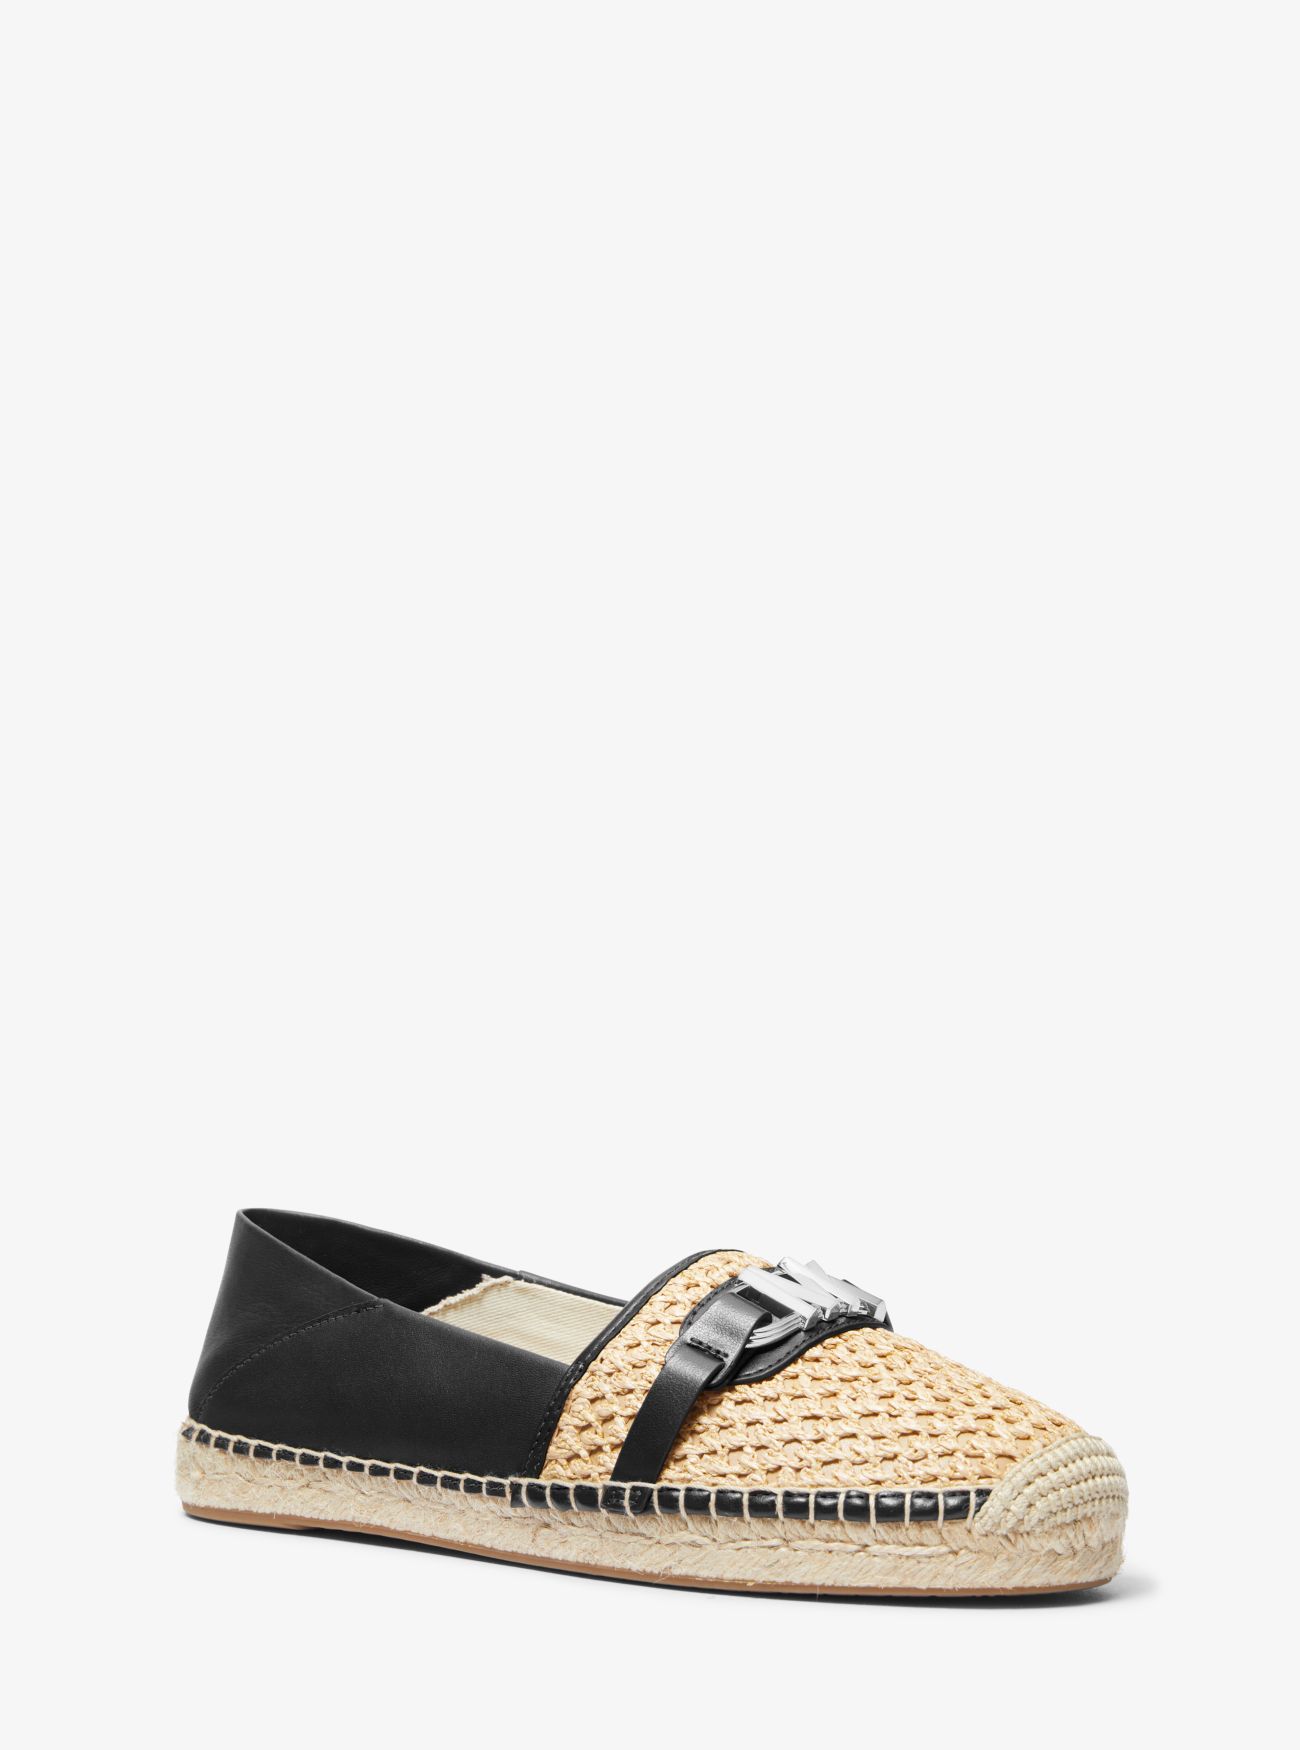 MK Ember Leather and Straw Espadrille - Natural - Michael Kors